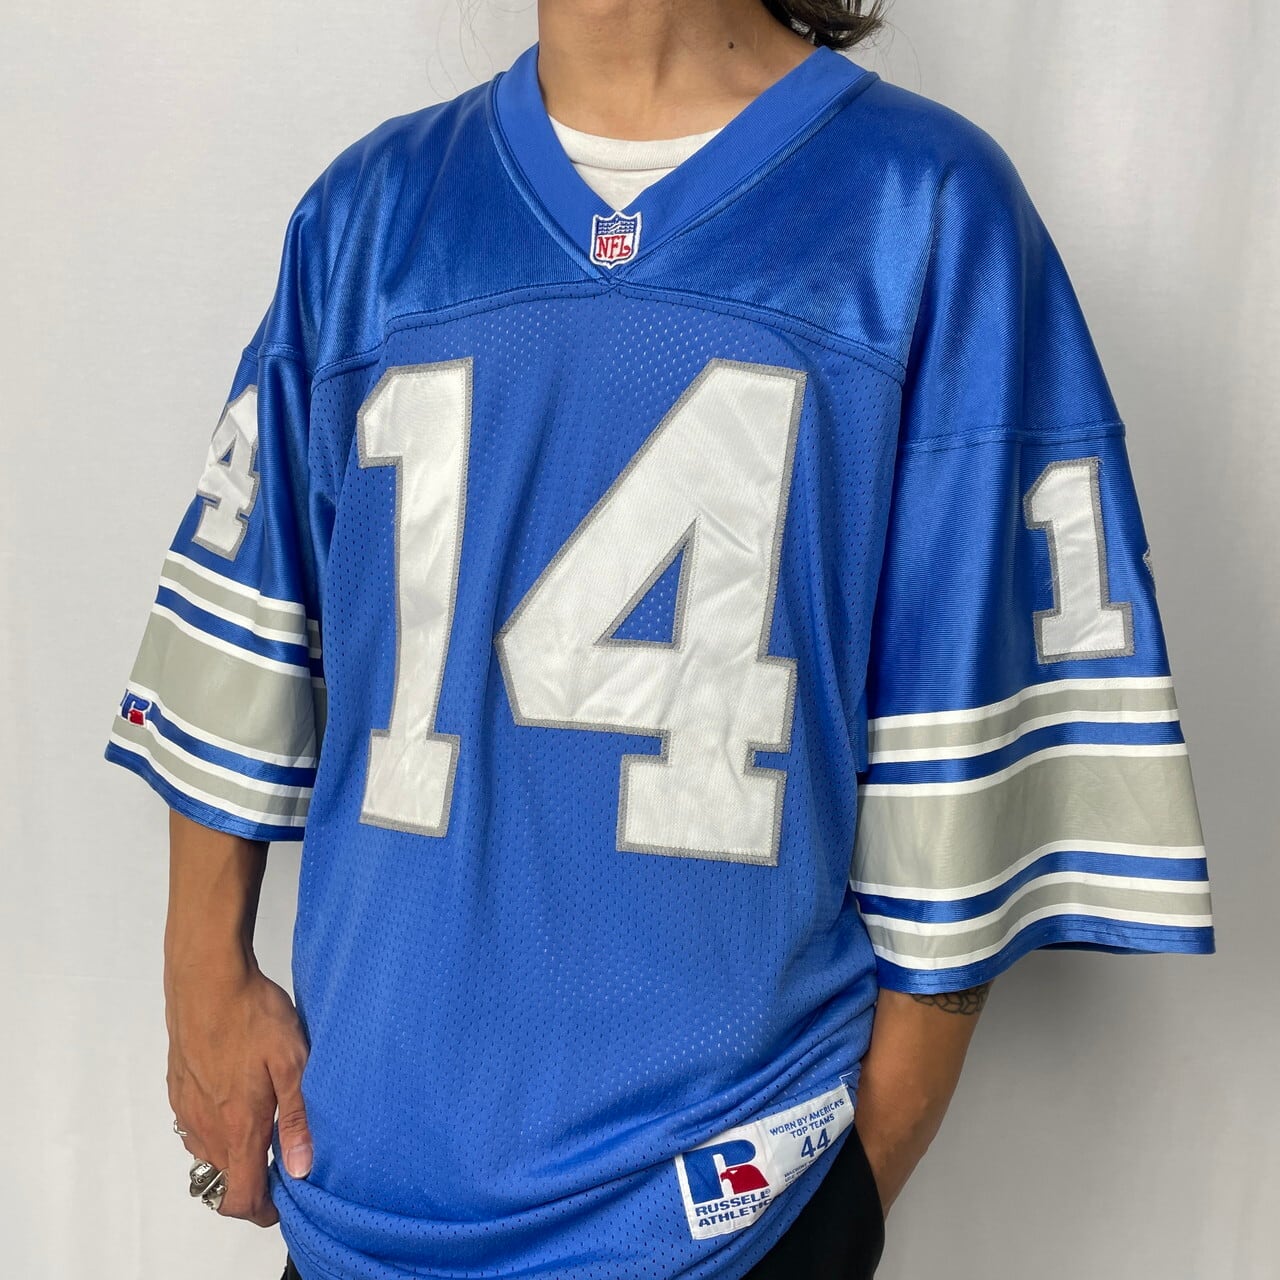 USA製 RUSSELL ATHLETIC ラッセルアスレチック NFL DUFFY 14